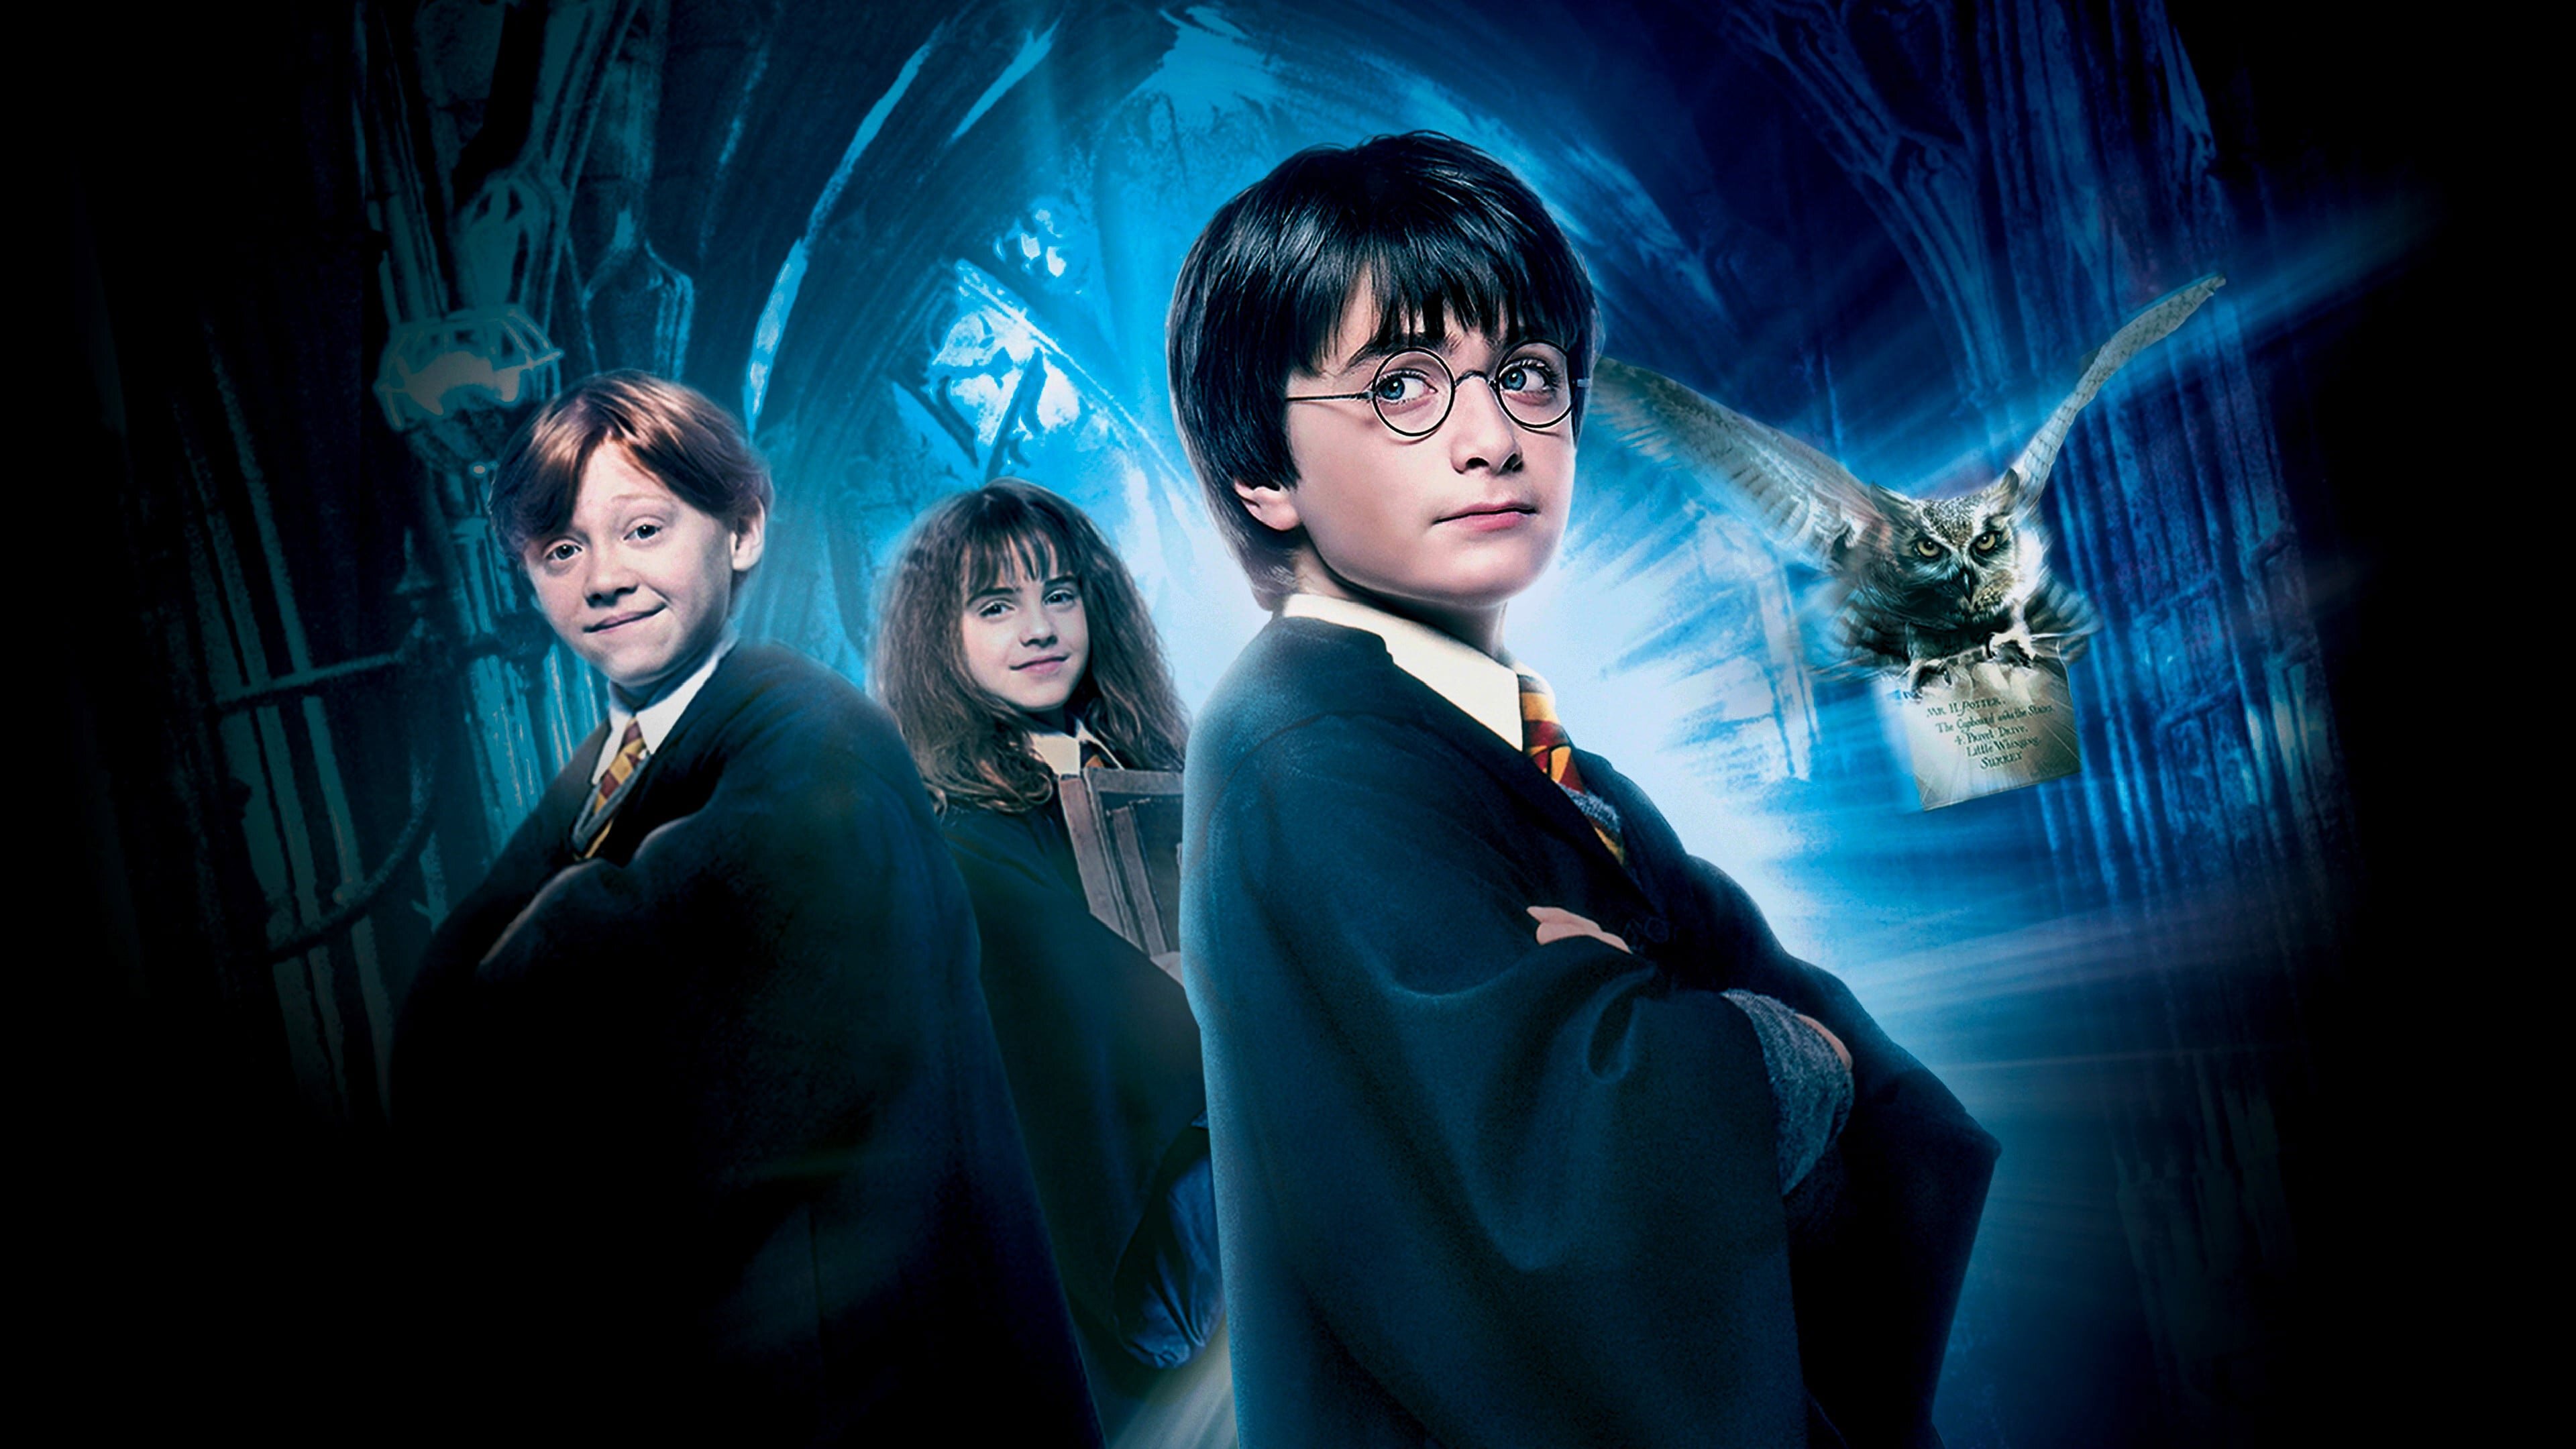 Harry Potter and the Philosopher's Stone - Movies - Buy/Rent